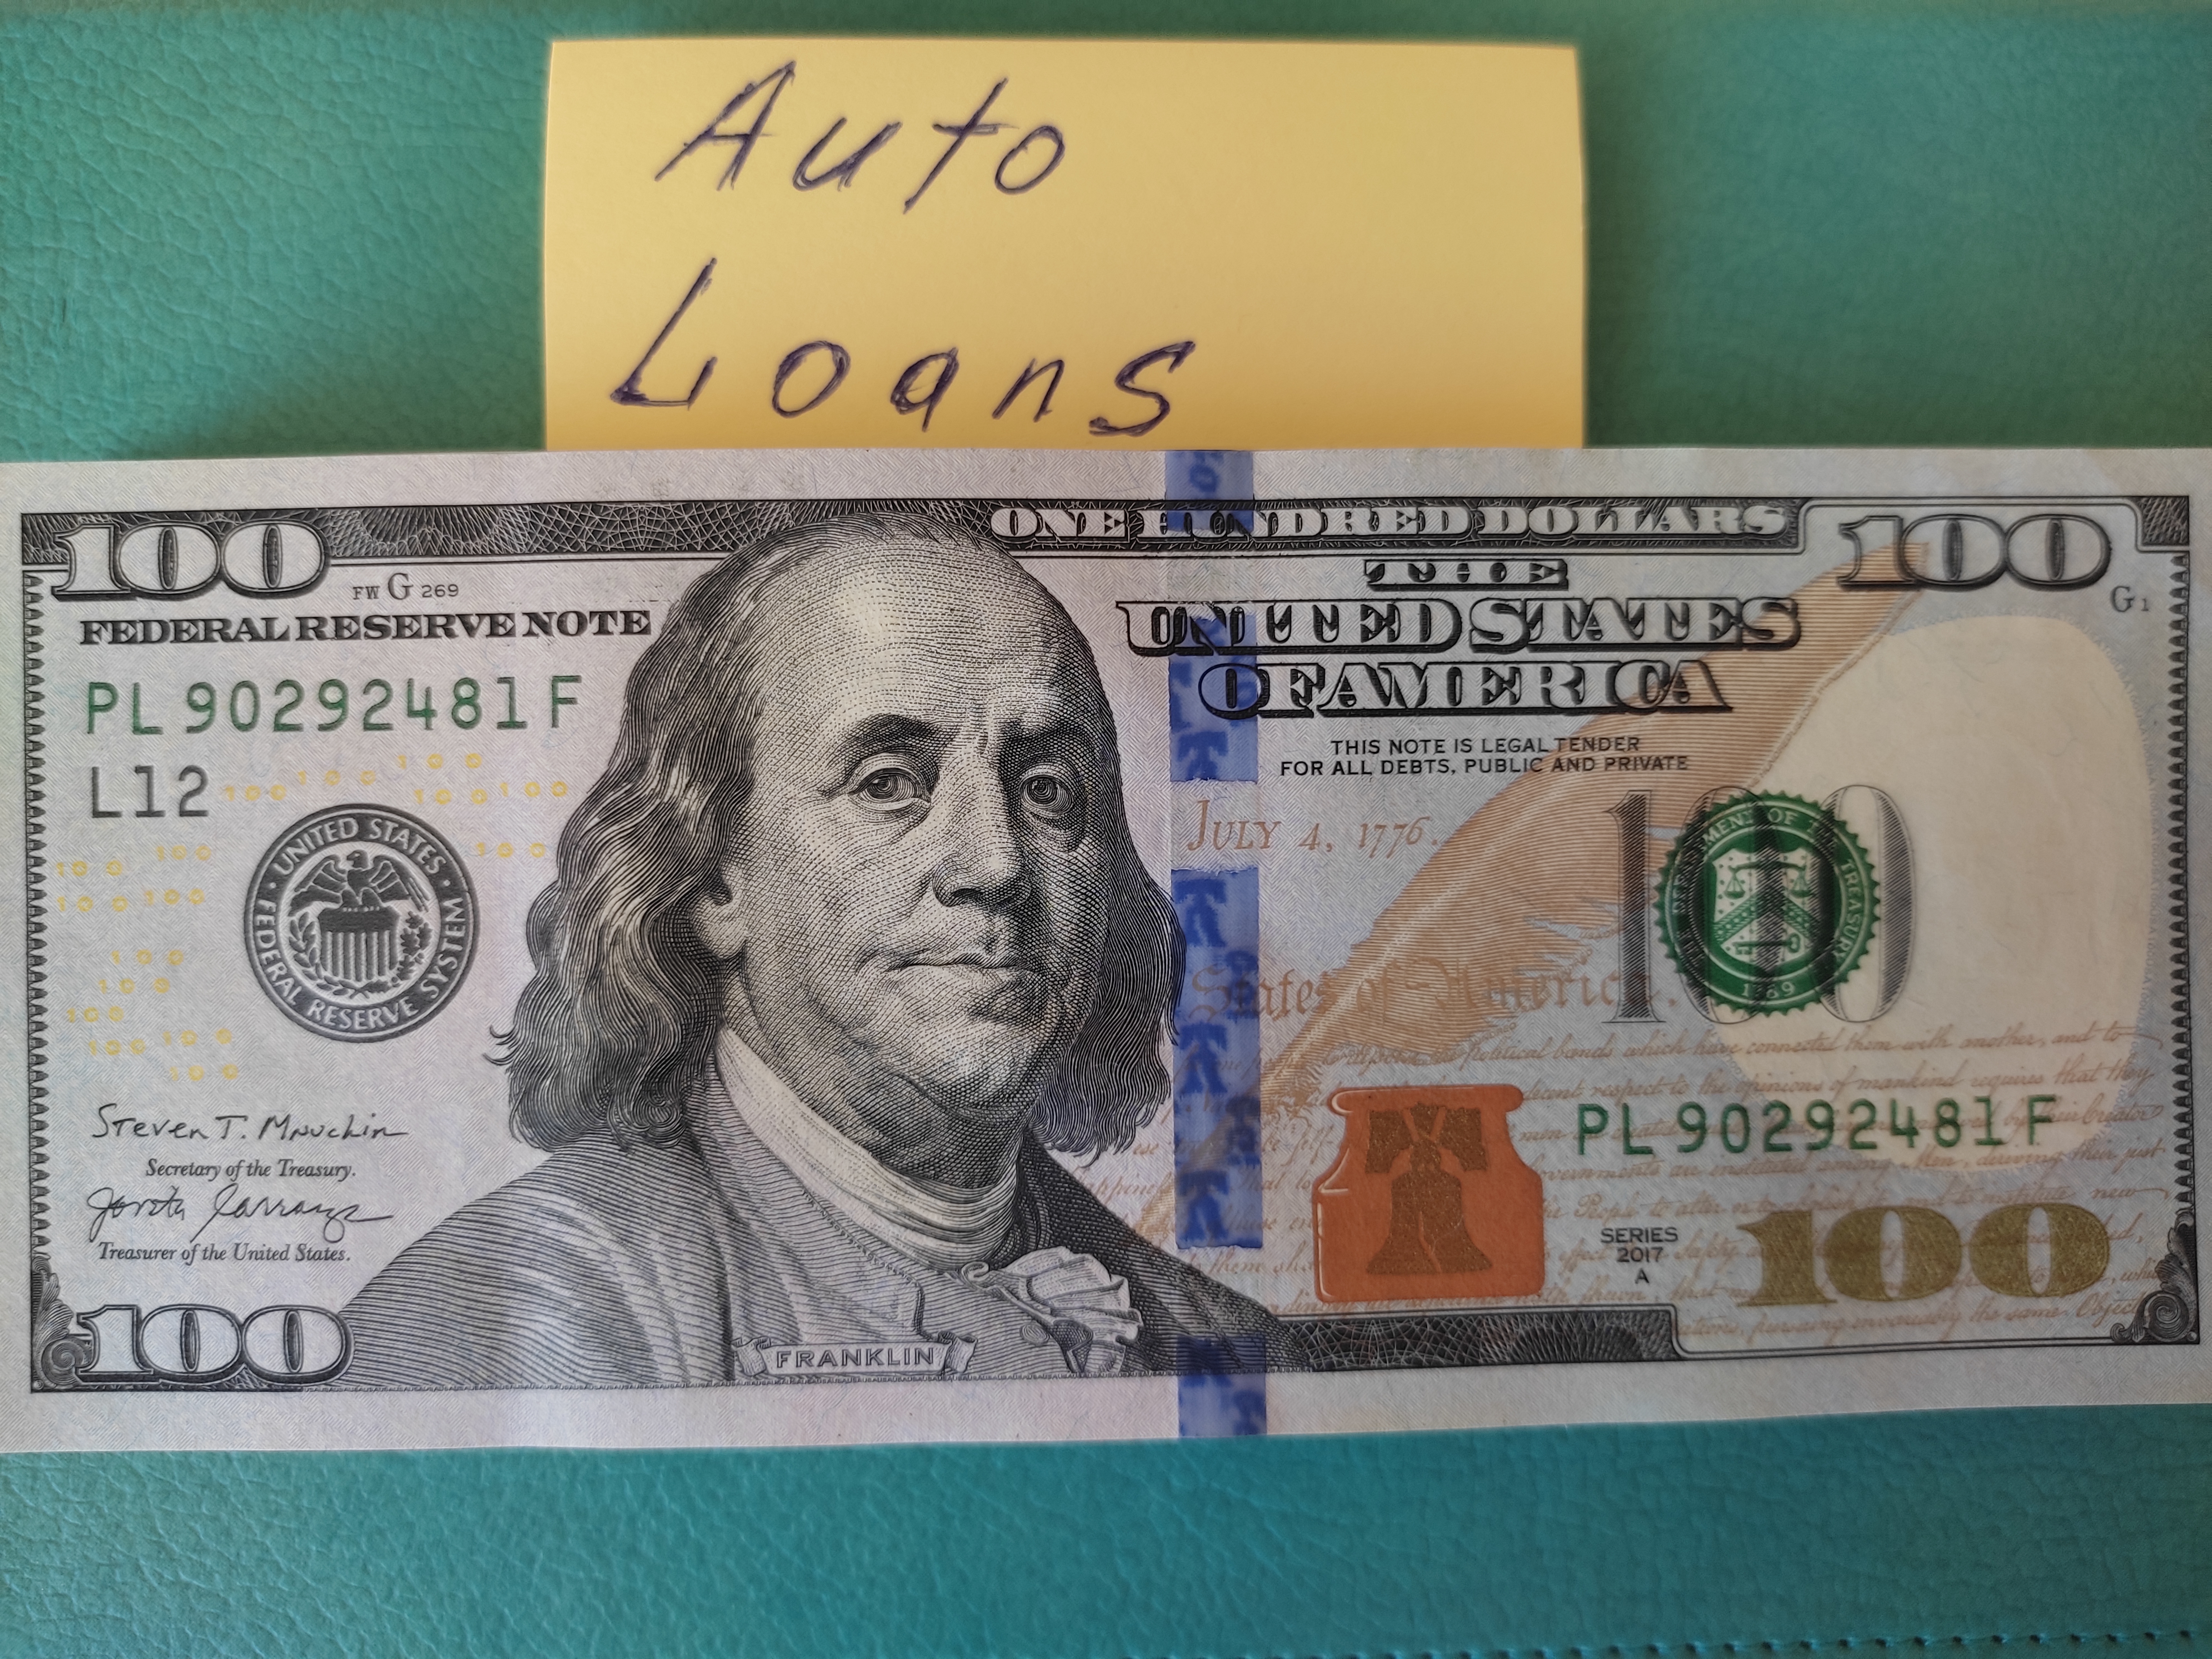 There are money on the table and a sticker, where it is written auto loans.